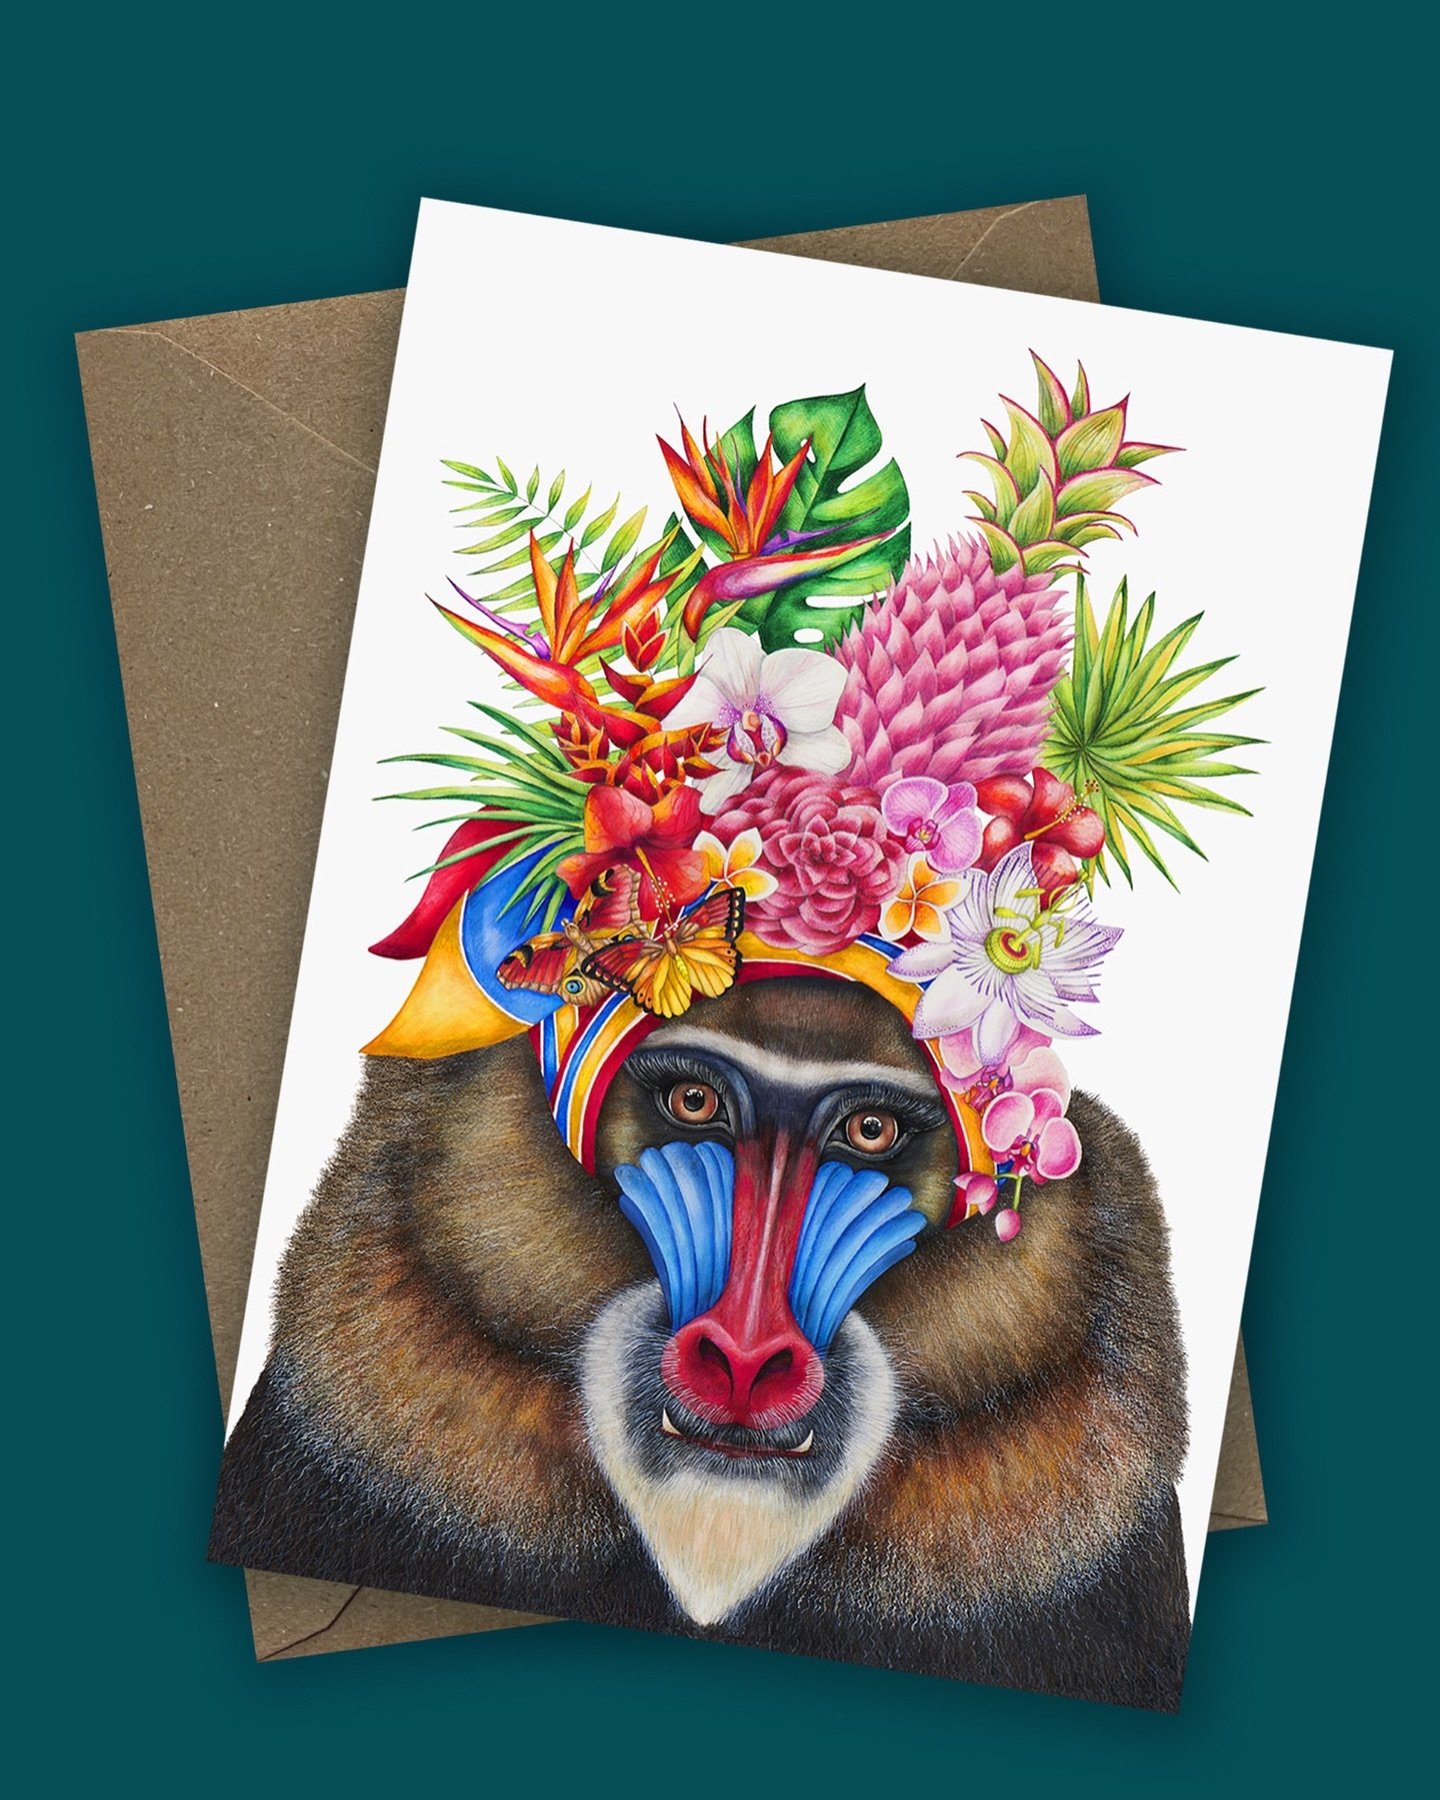 naturalquirkscollection
NEW LAUNCH of Fine Art Cards❤️❤️❤️❤️

Natural Quirks Fine Art Cards Collection 
Carmen Mirandrill Card

Now all of my limited edition prints are created as Fine Art Cards now for sale on the website. 
https://naturalquirks.com